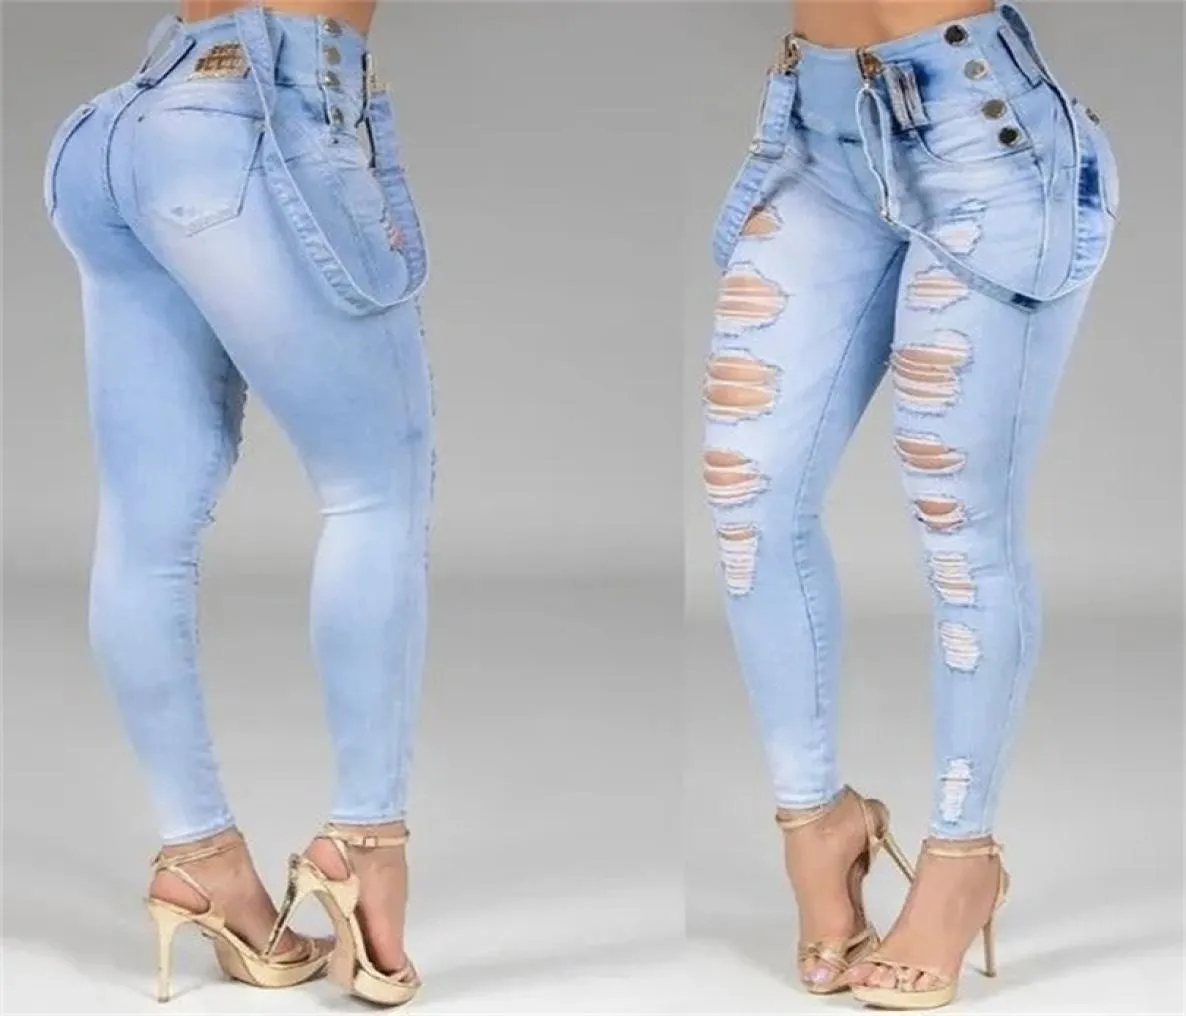 Women Jeans High Waisted Straight Skinny Stretchy Pant Streetwear Ladies Hole Washed Bandage Denim Pencil Pants Trousers 2204236941897